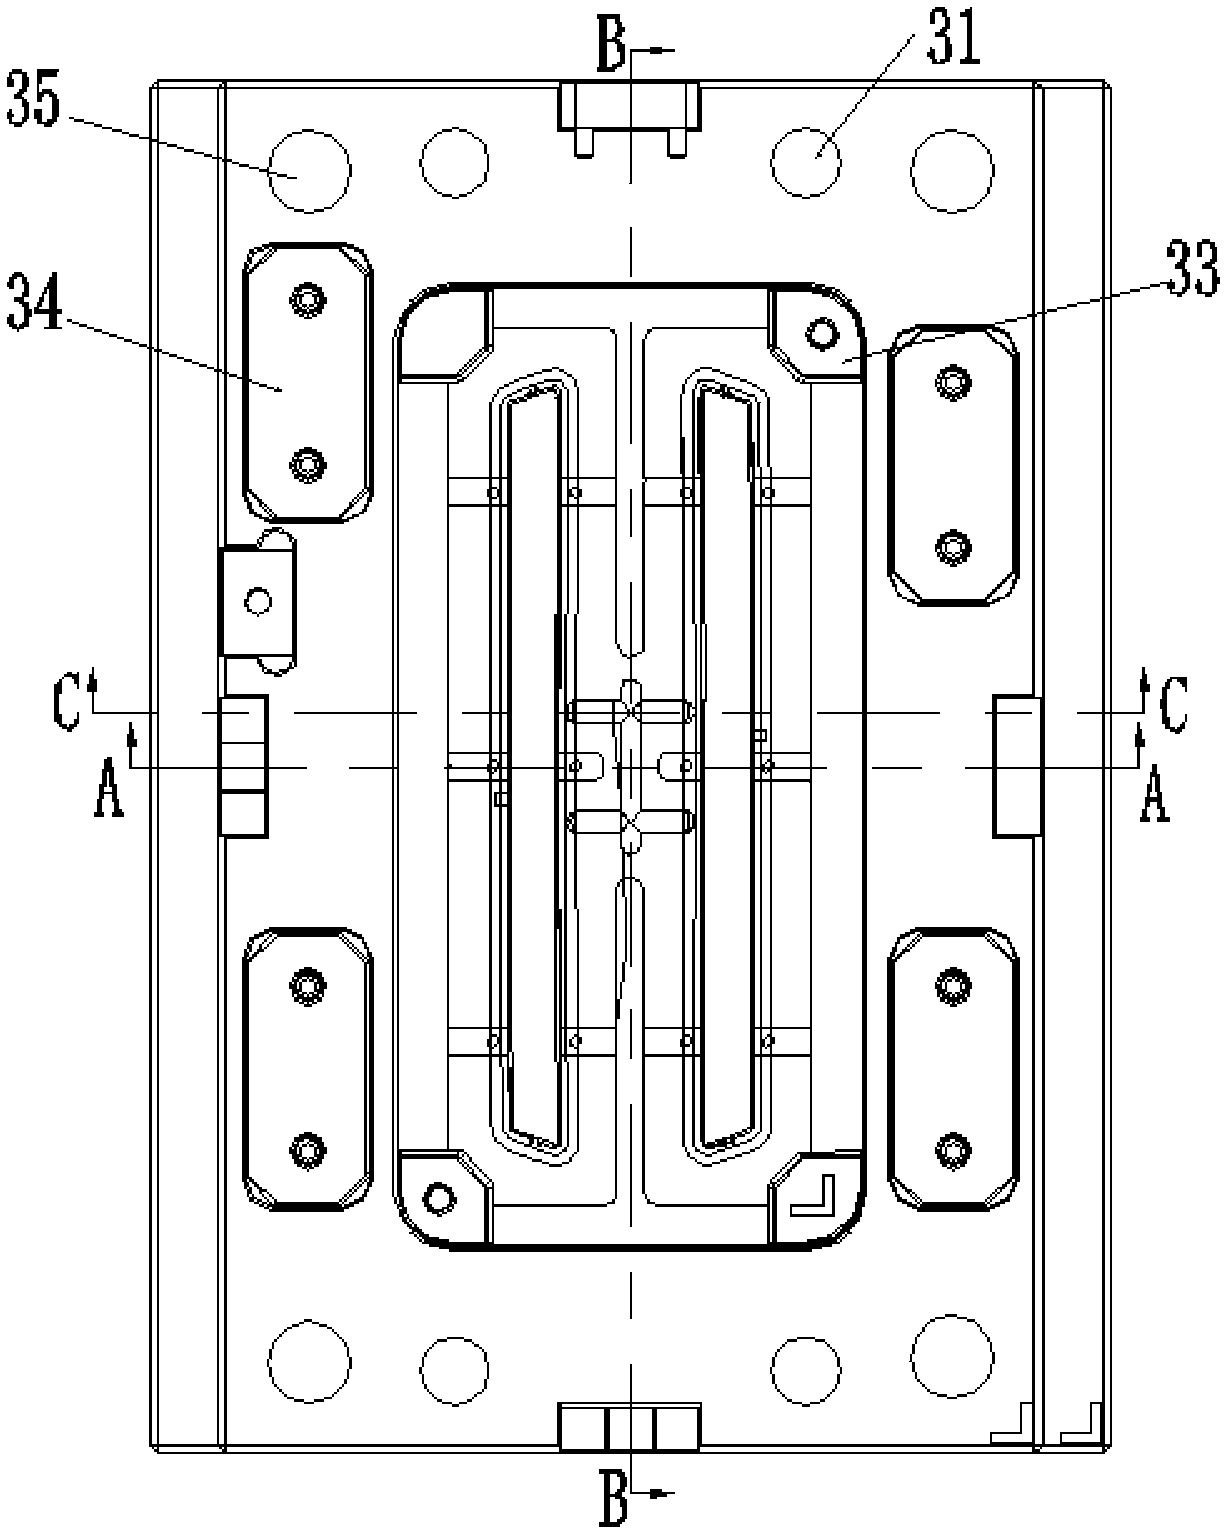 Injection mold adopting IMR process and application method for injection mold